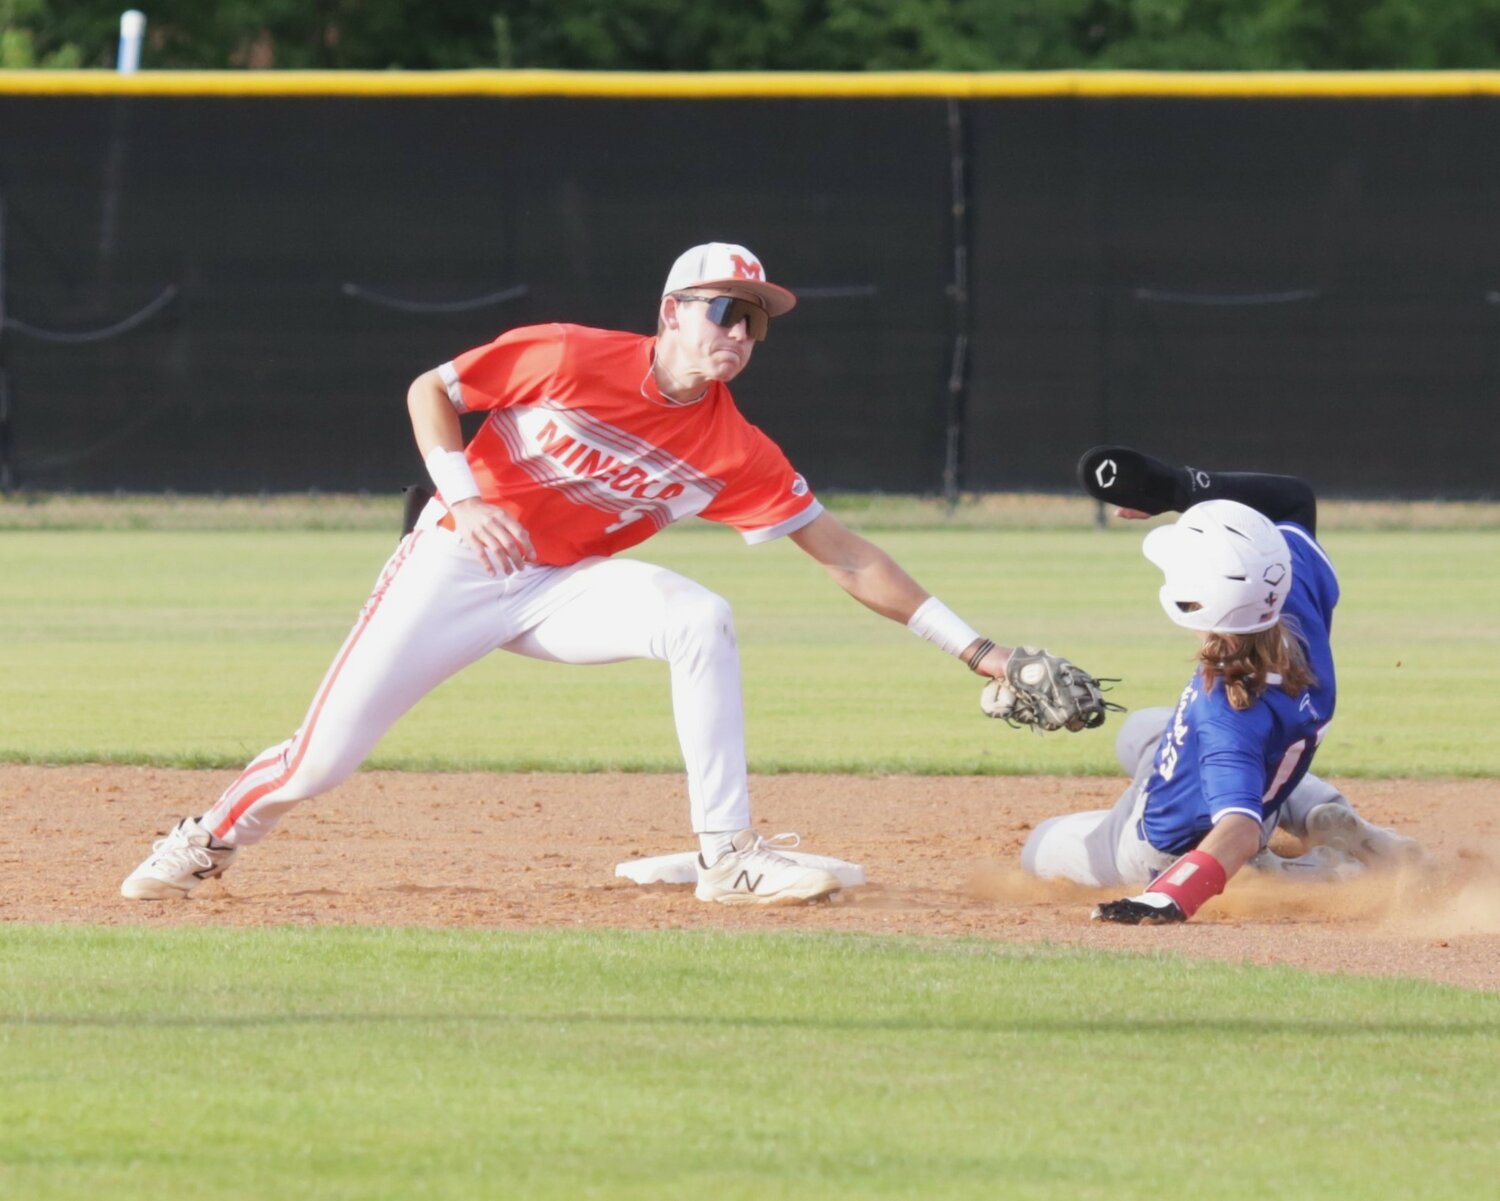 Mineola shortstop Spencer Joyner puts a tag on a Prairiland baserunner trying to steal second. Matthew Ballew’s throw arrived exactly where it needed to be to catch the runner.